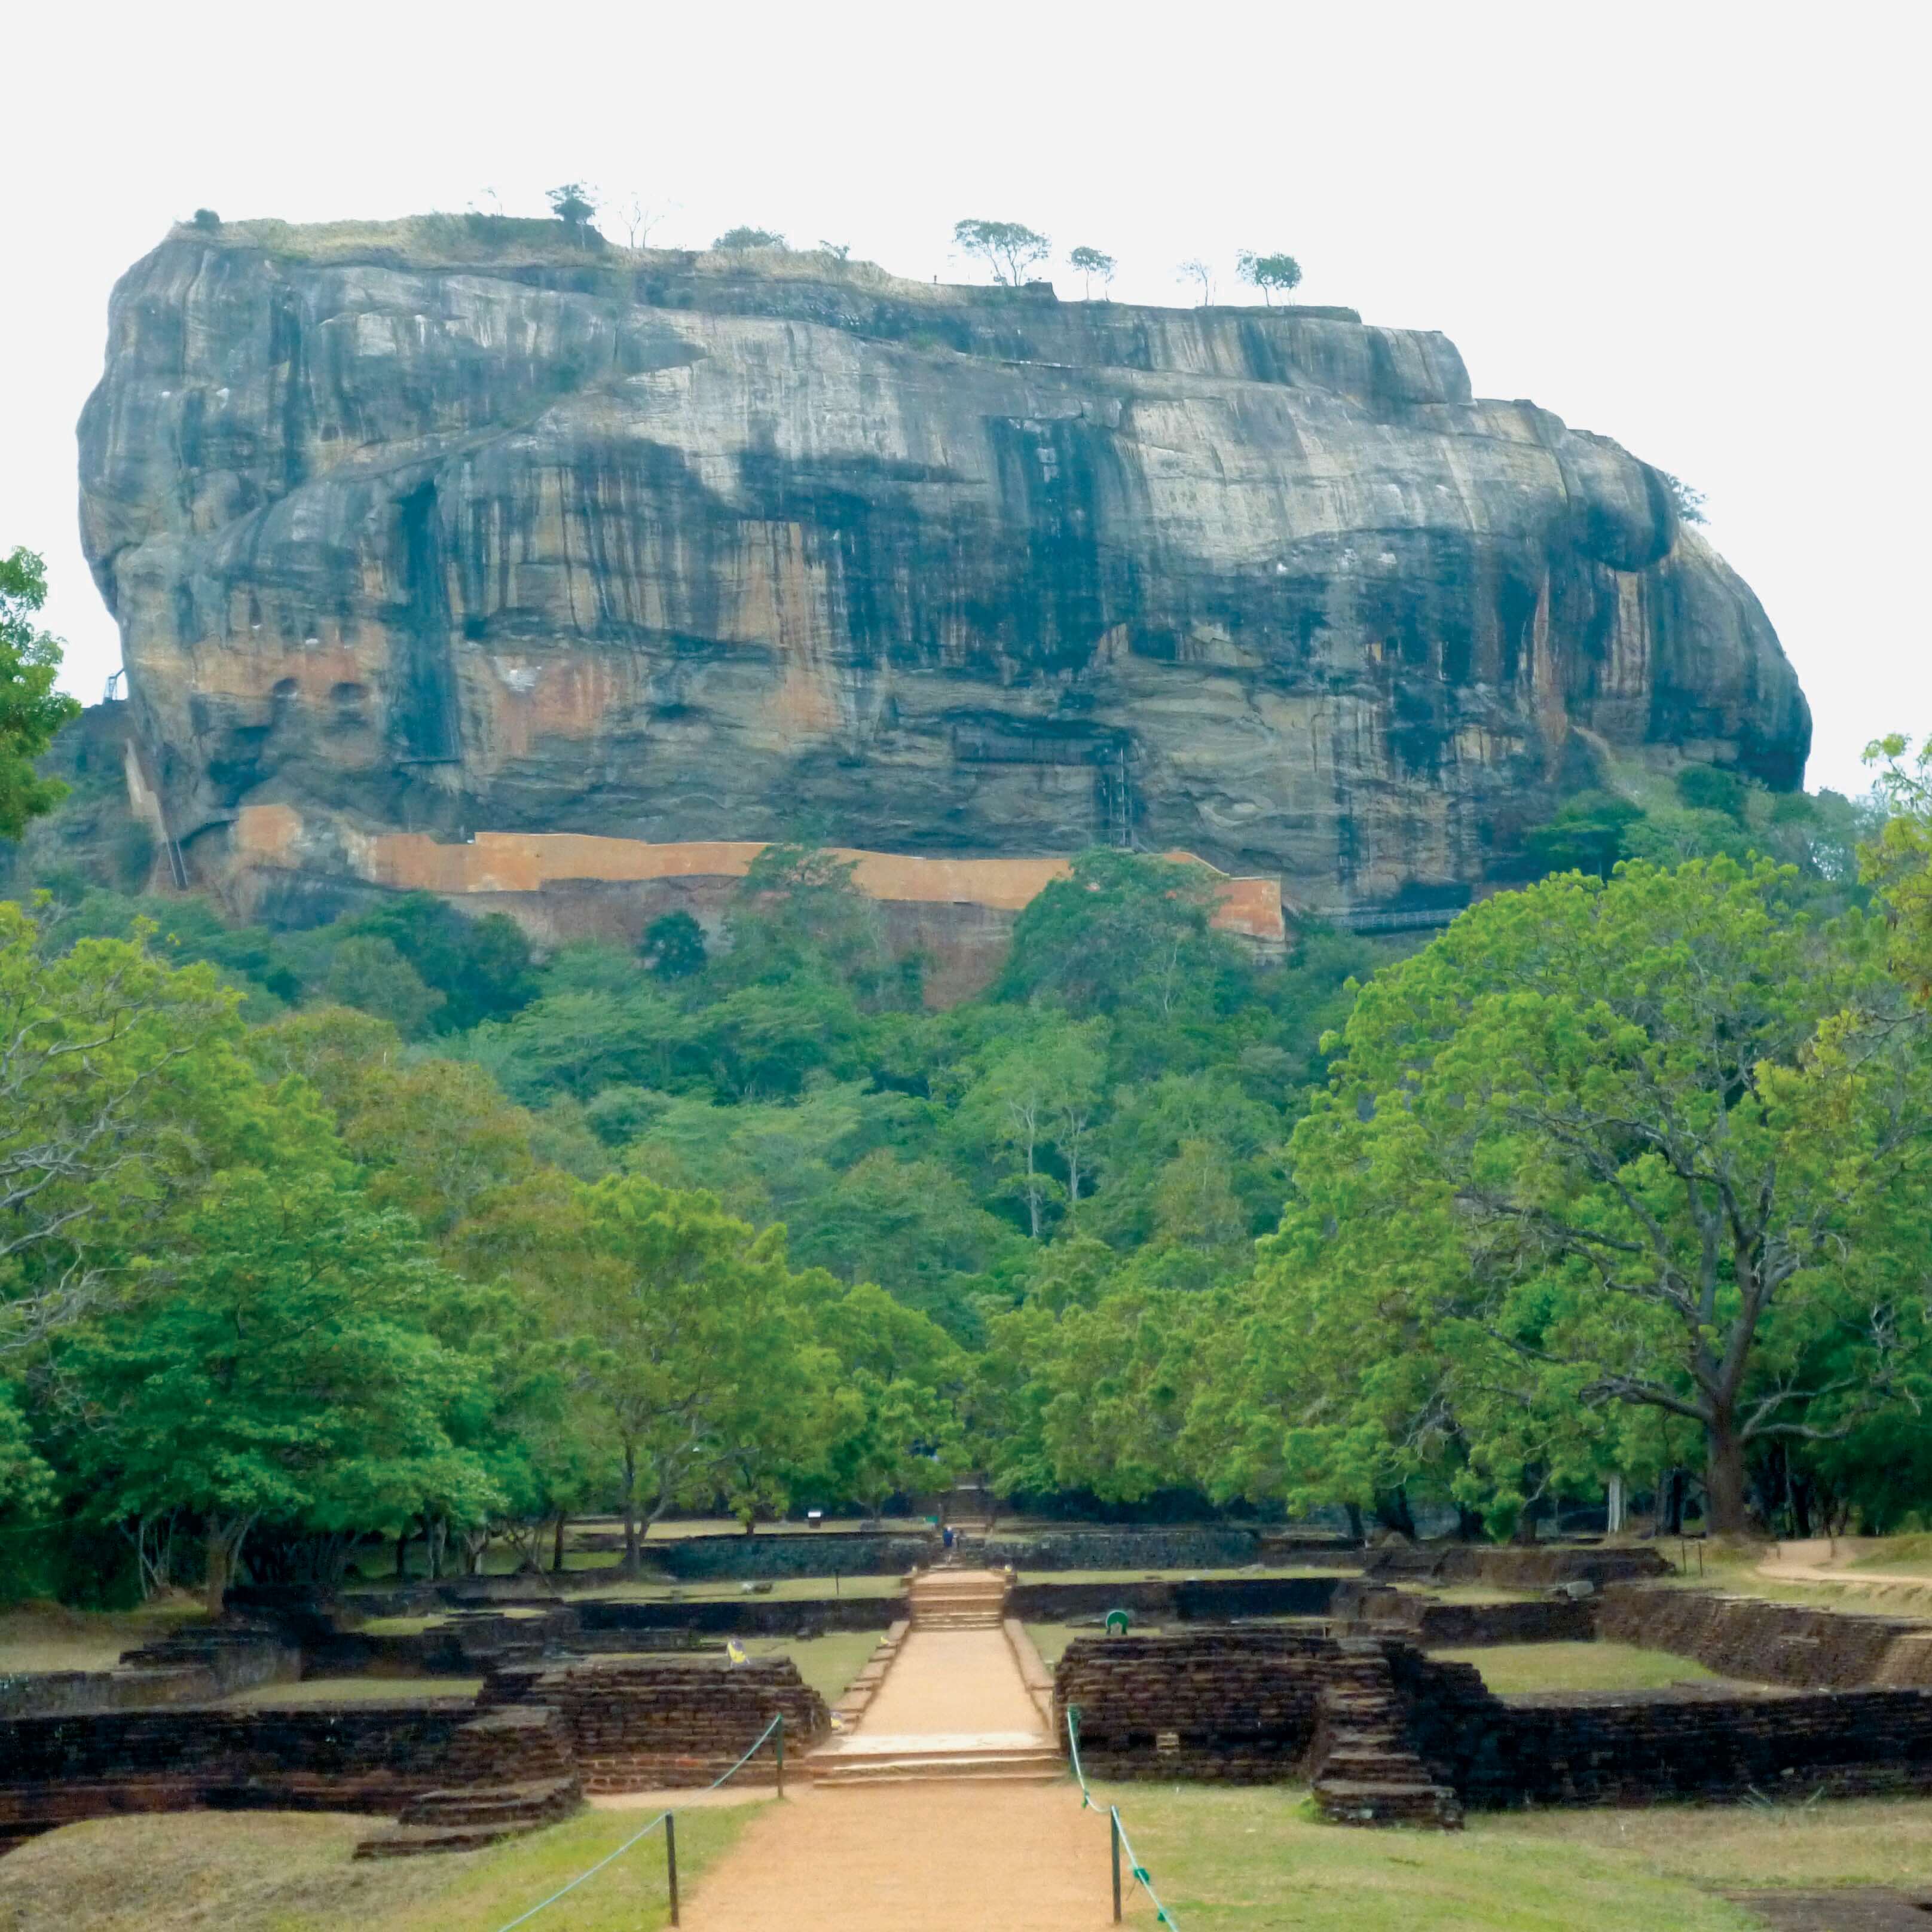 Sigiriya was designated as a World Heritage Site in 1982. It is a two hundred meter high rock surrounded by the remains
of an extensive network of gardens, reservoirs, and other structures and is believed to have been the Golden Palace of
Ravana –Swarna Lanka